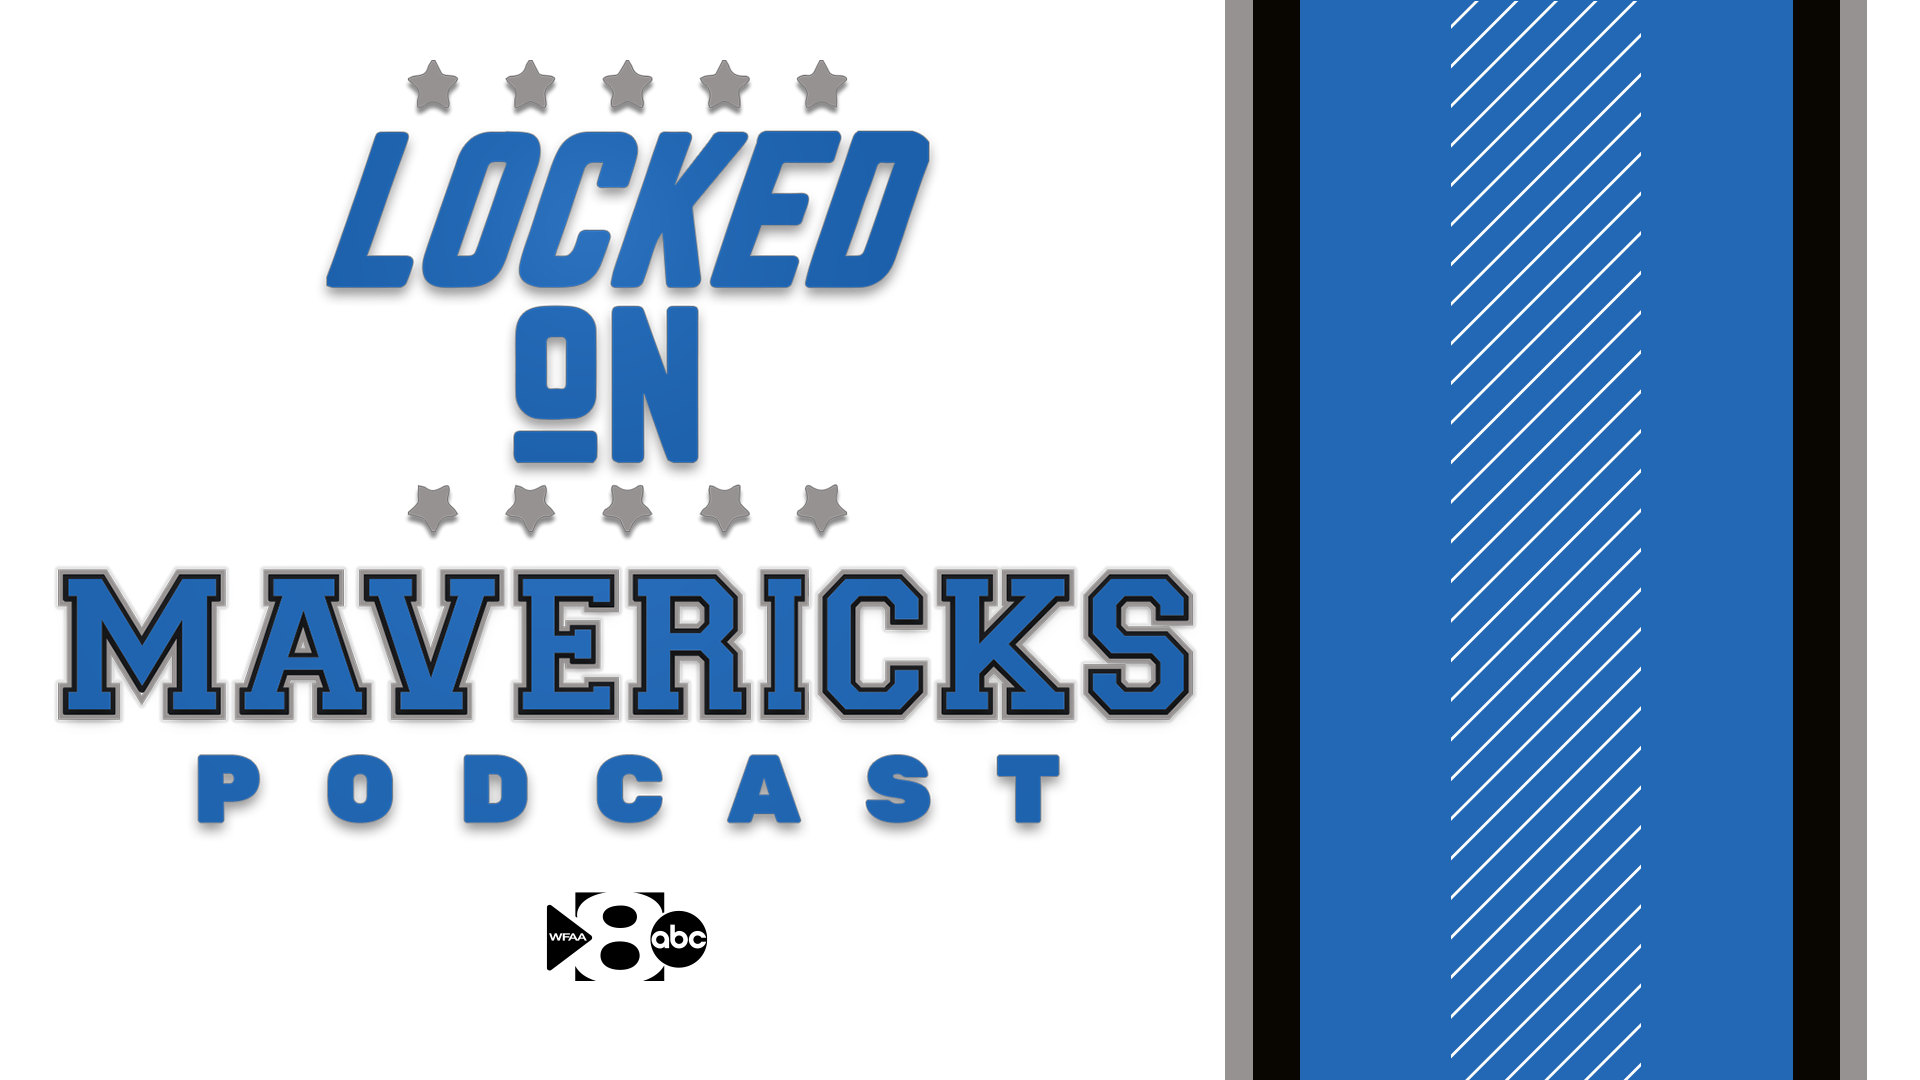 Nick Angstadt and Isaac Harris how the Mavericks can ensure a win against the Clippers in the playoffs in a rematch from the 2020 playoffs.